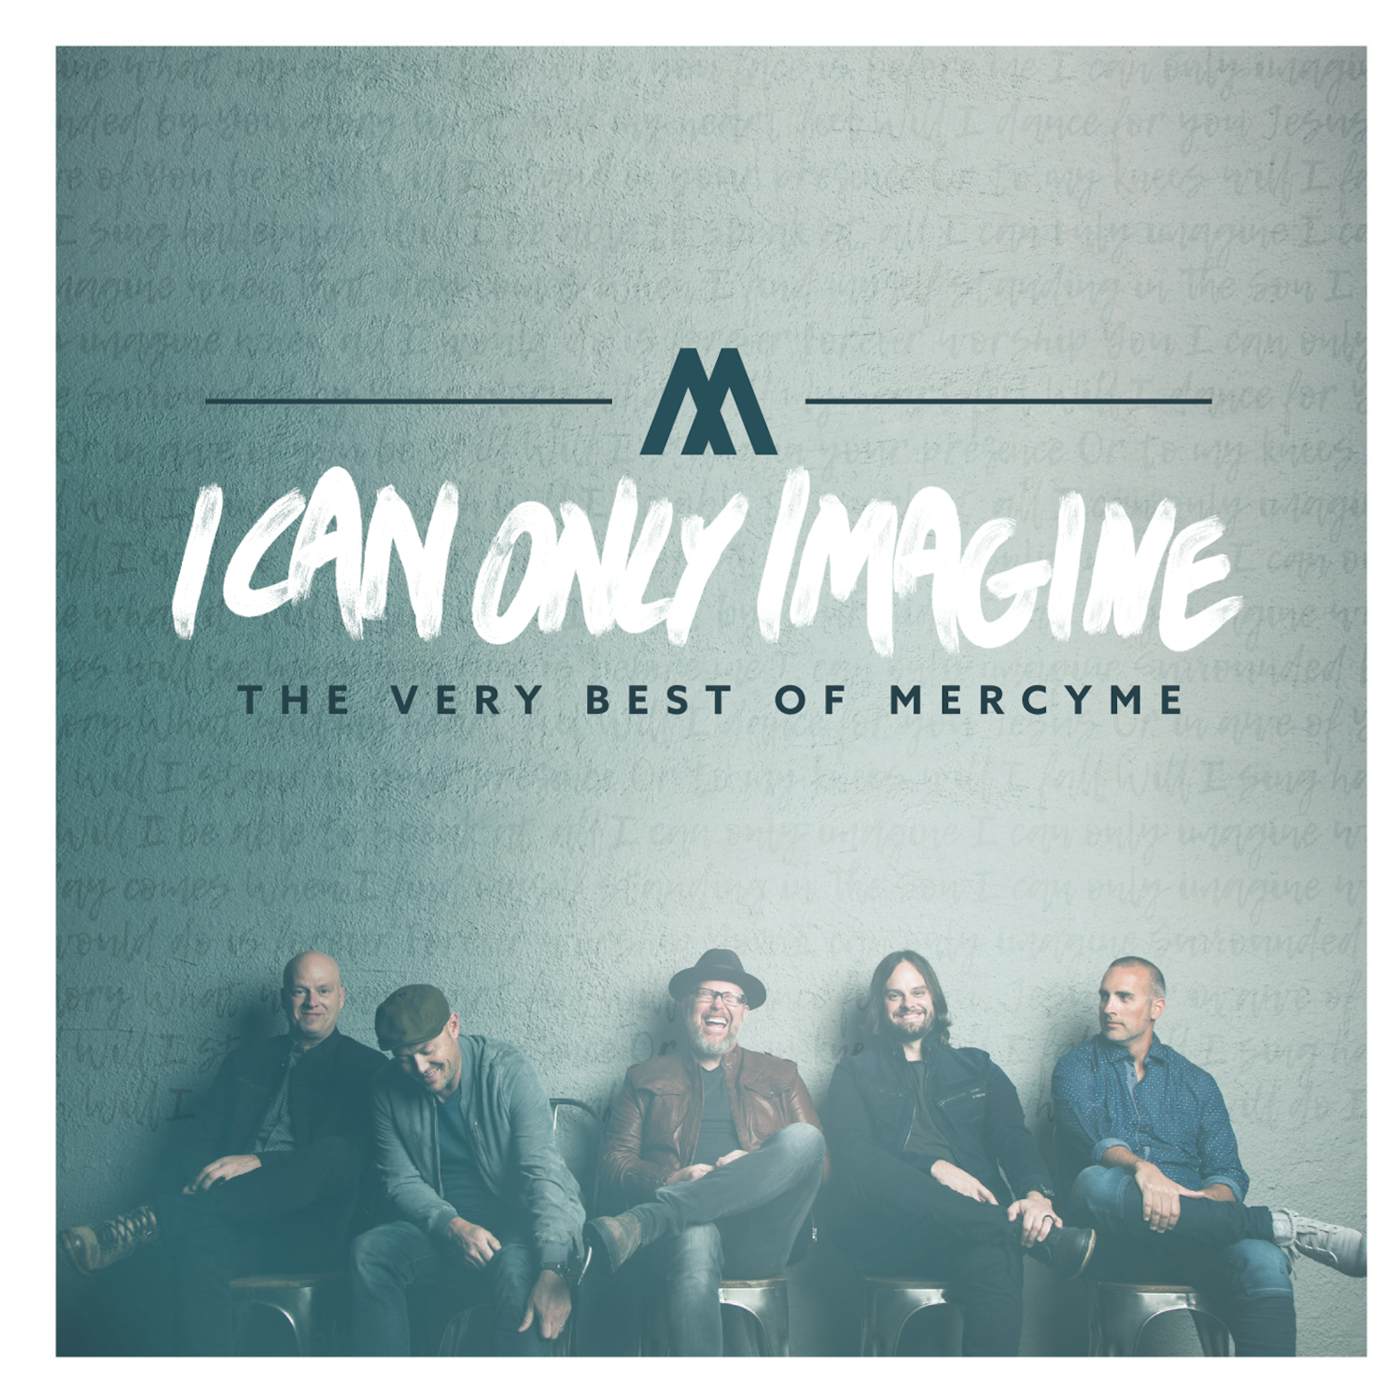 I CAN ONLY IMAGINE - THE VERY BEST OF MERCYME CD